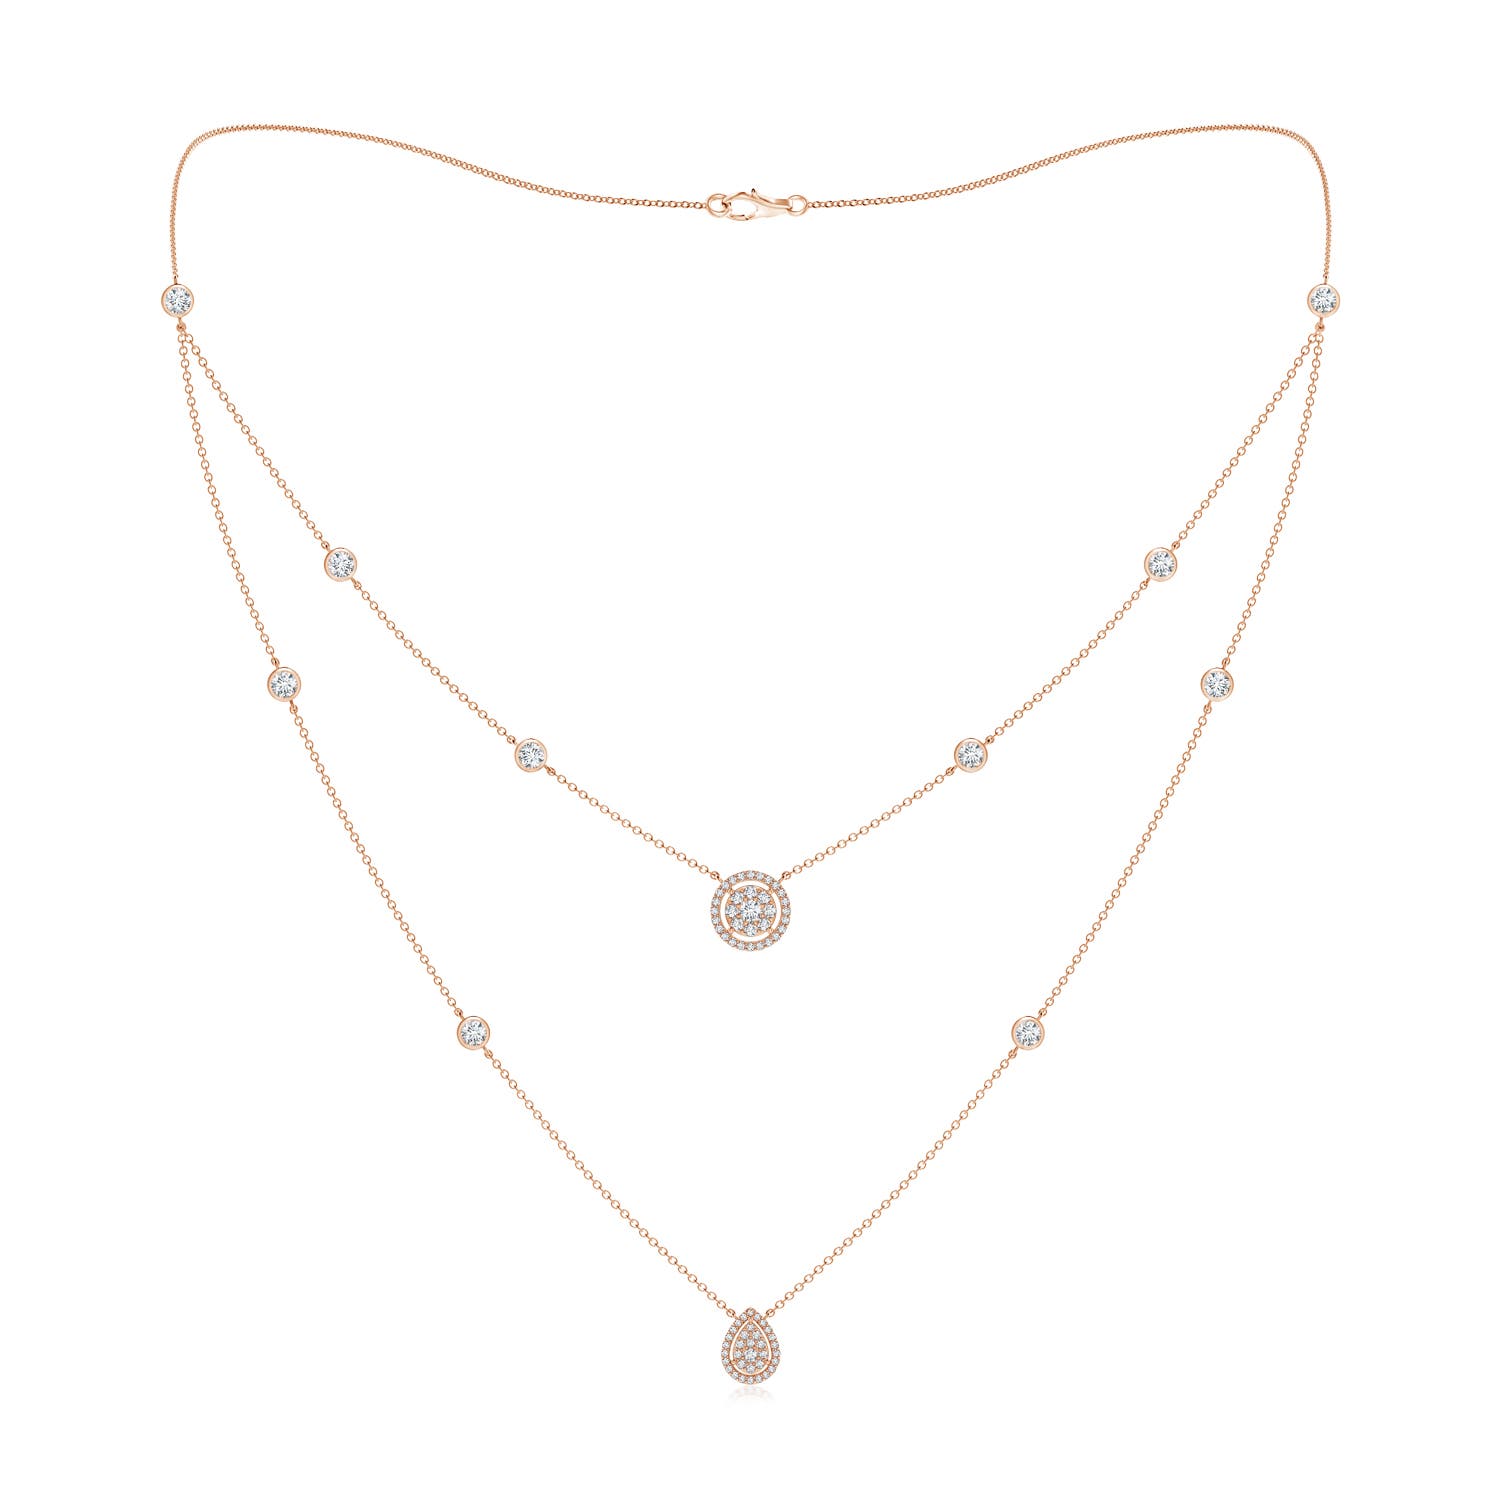 How to Choose The Perfect Necklace For Your Neckline